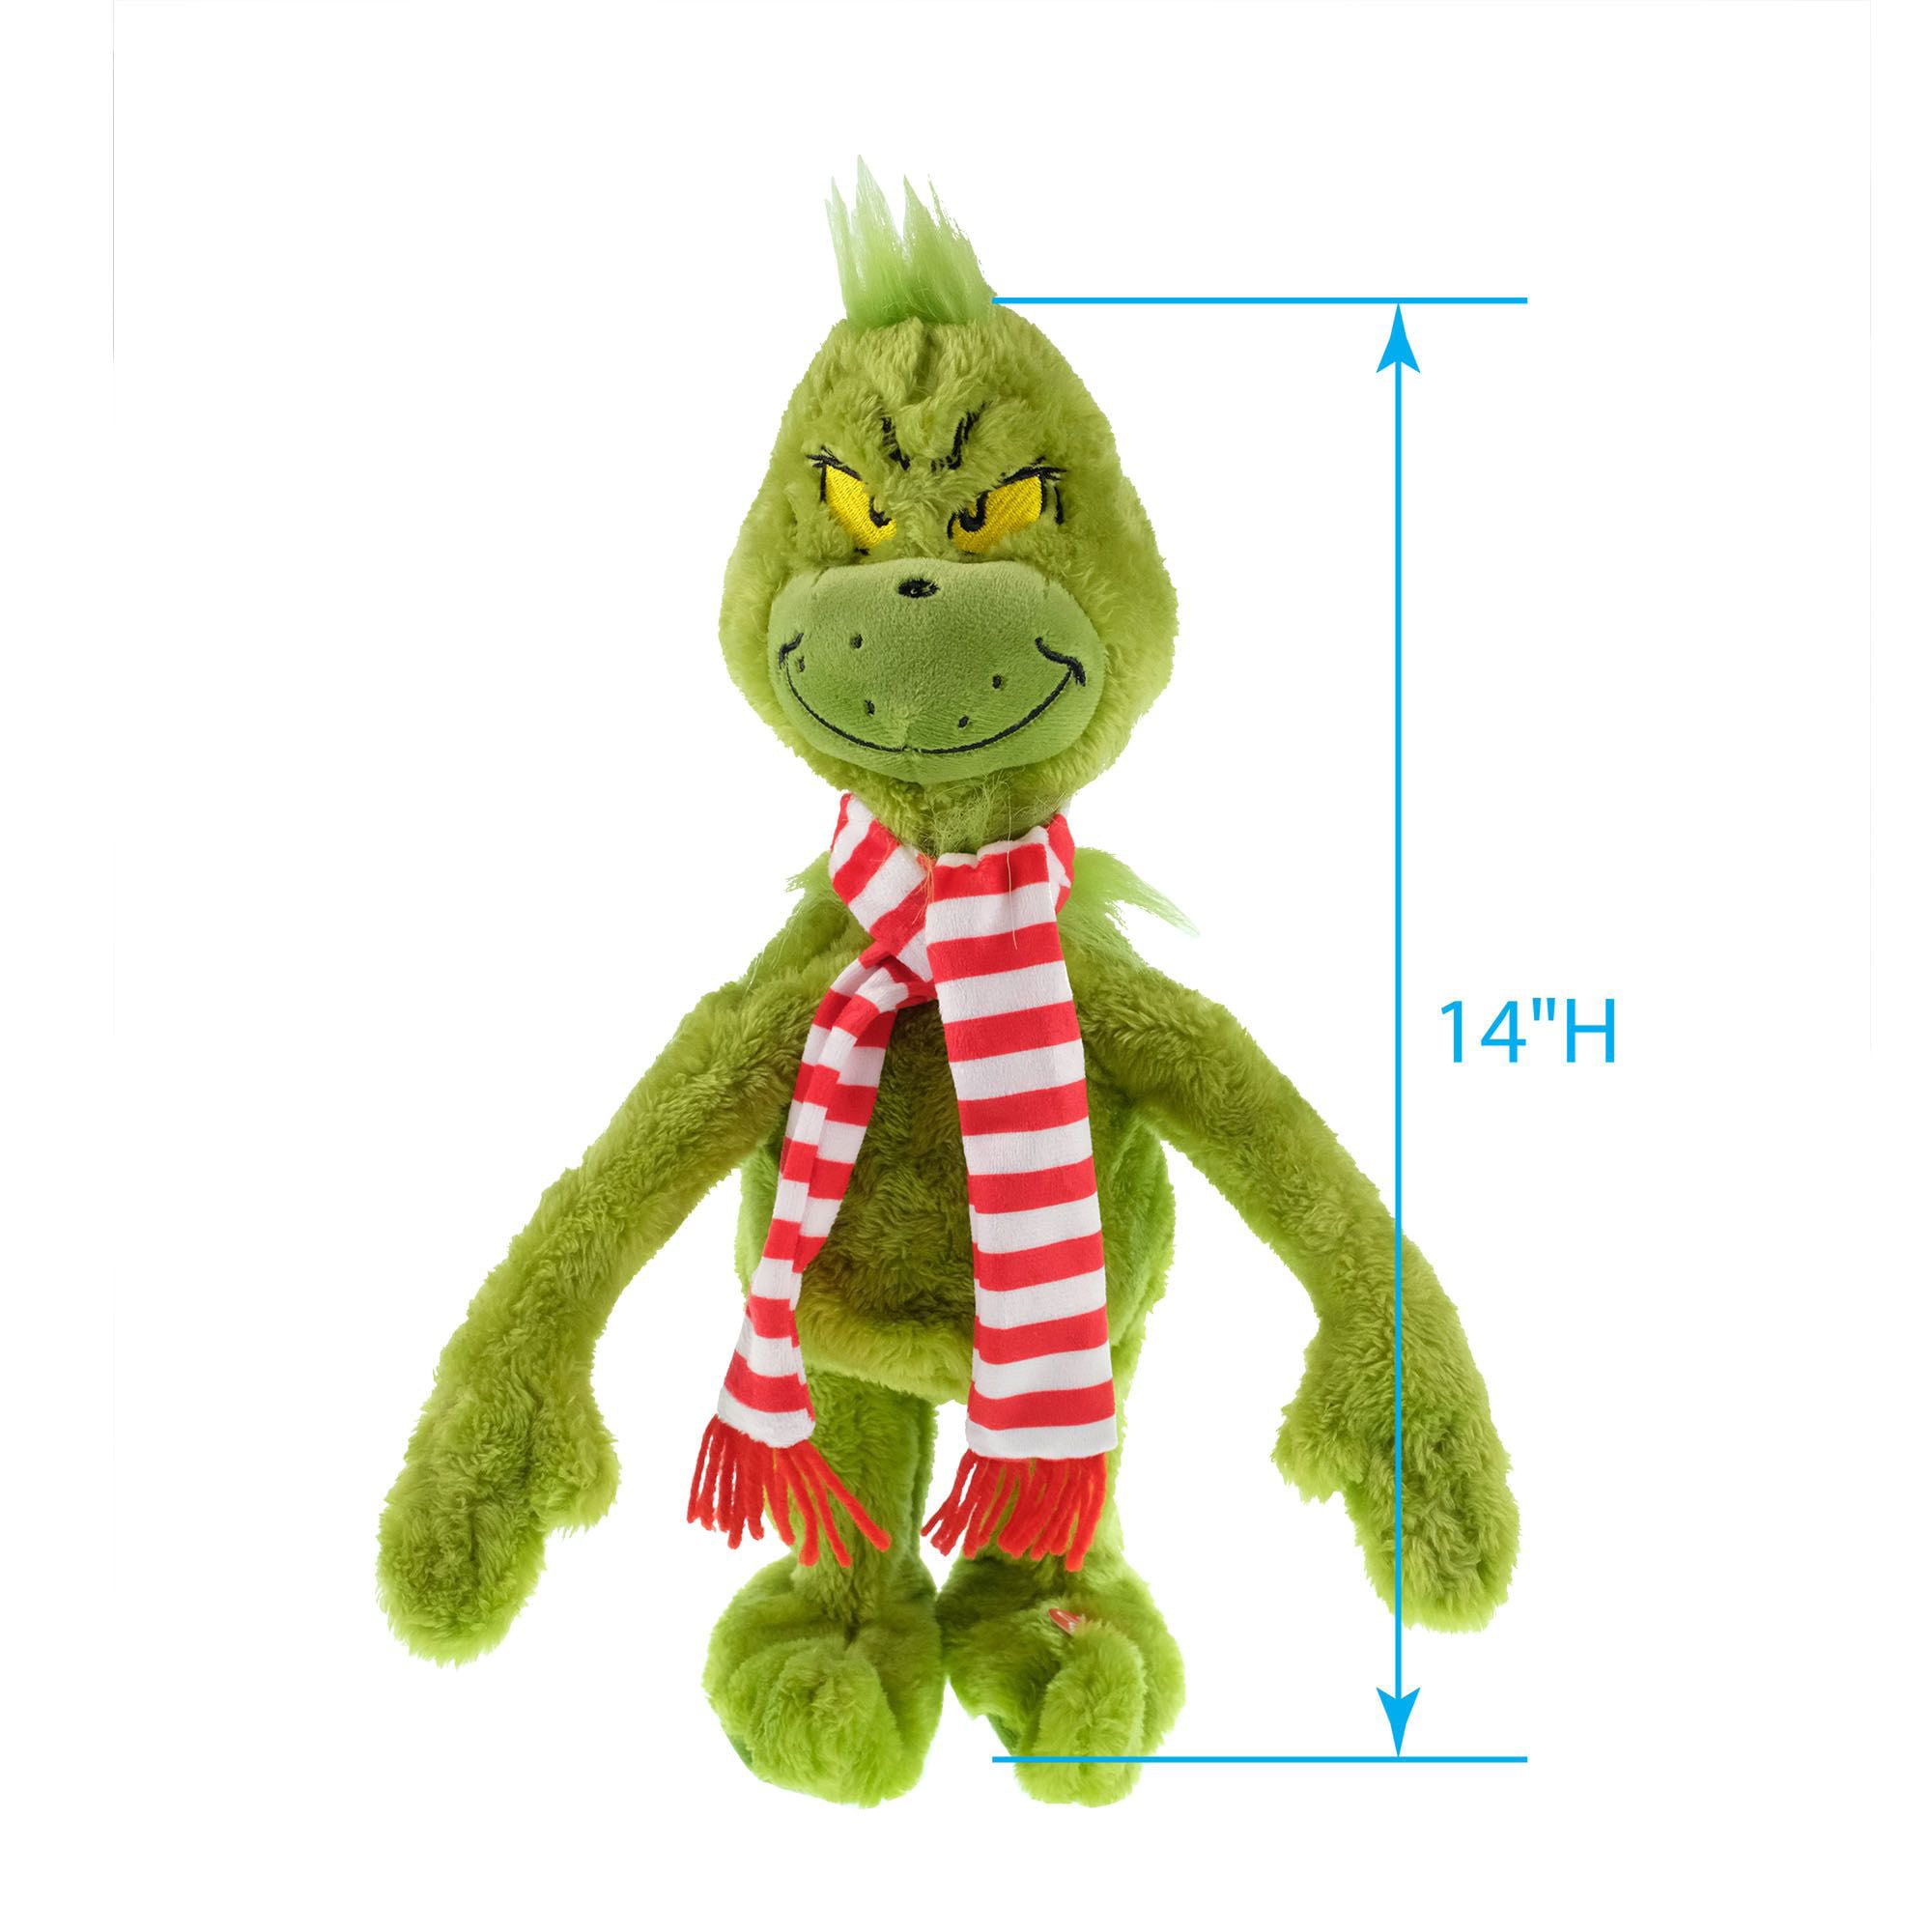 BRAND NEW The Grinch Who Stole Christmas 14" Grinch Plush Doll    Dr Seuss 